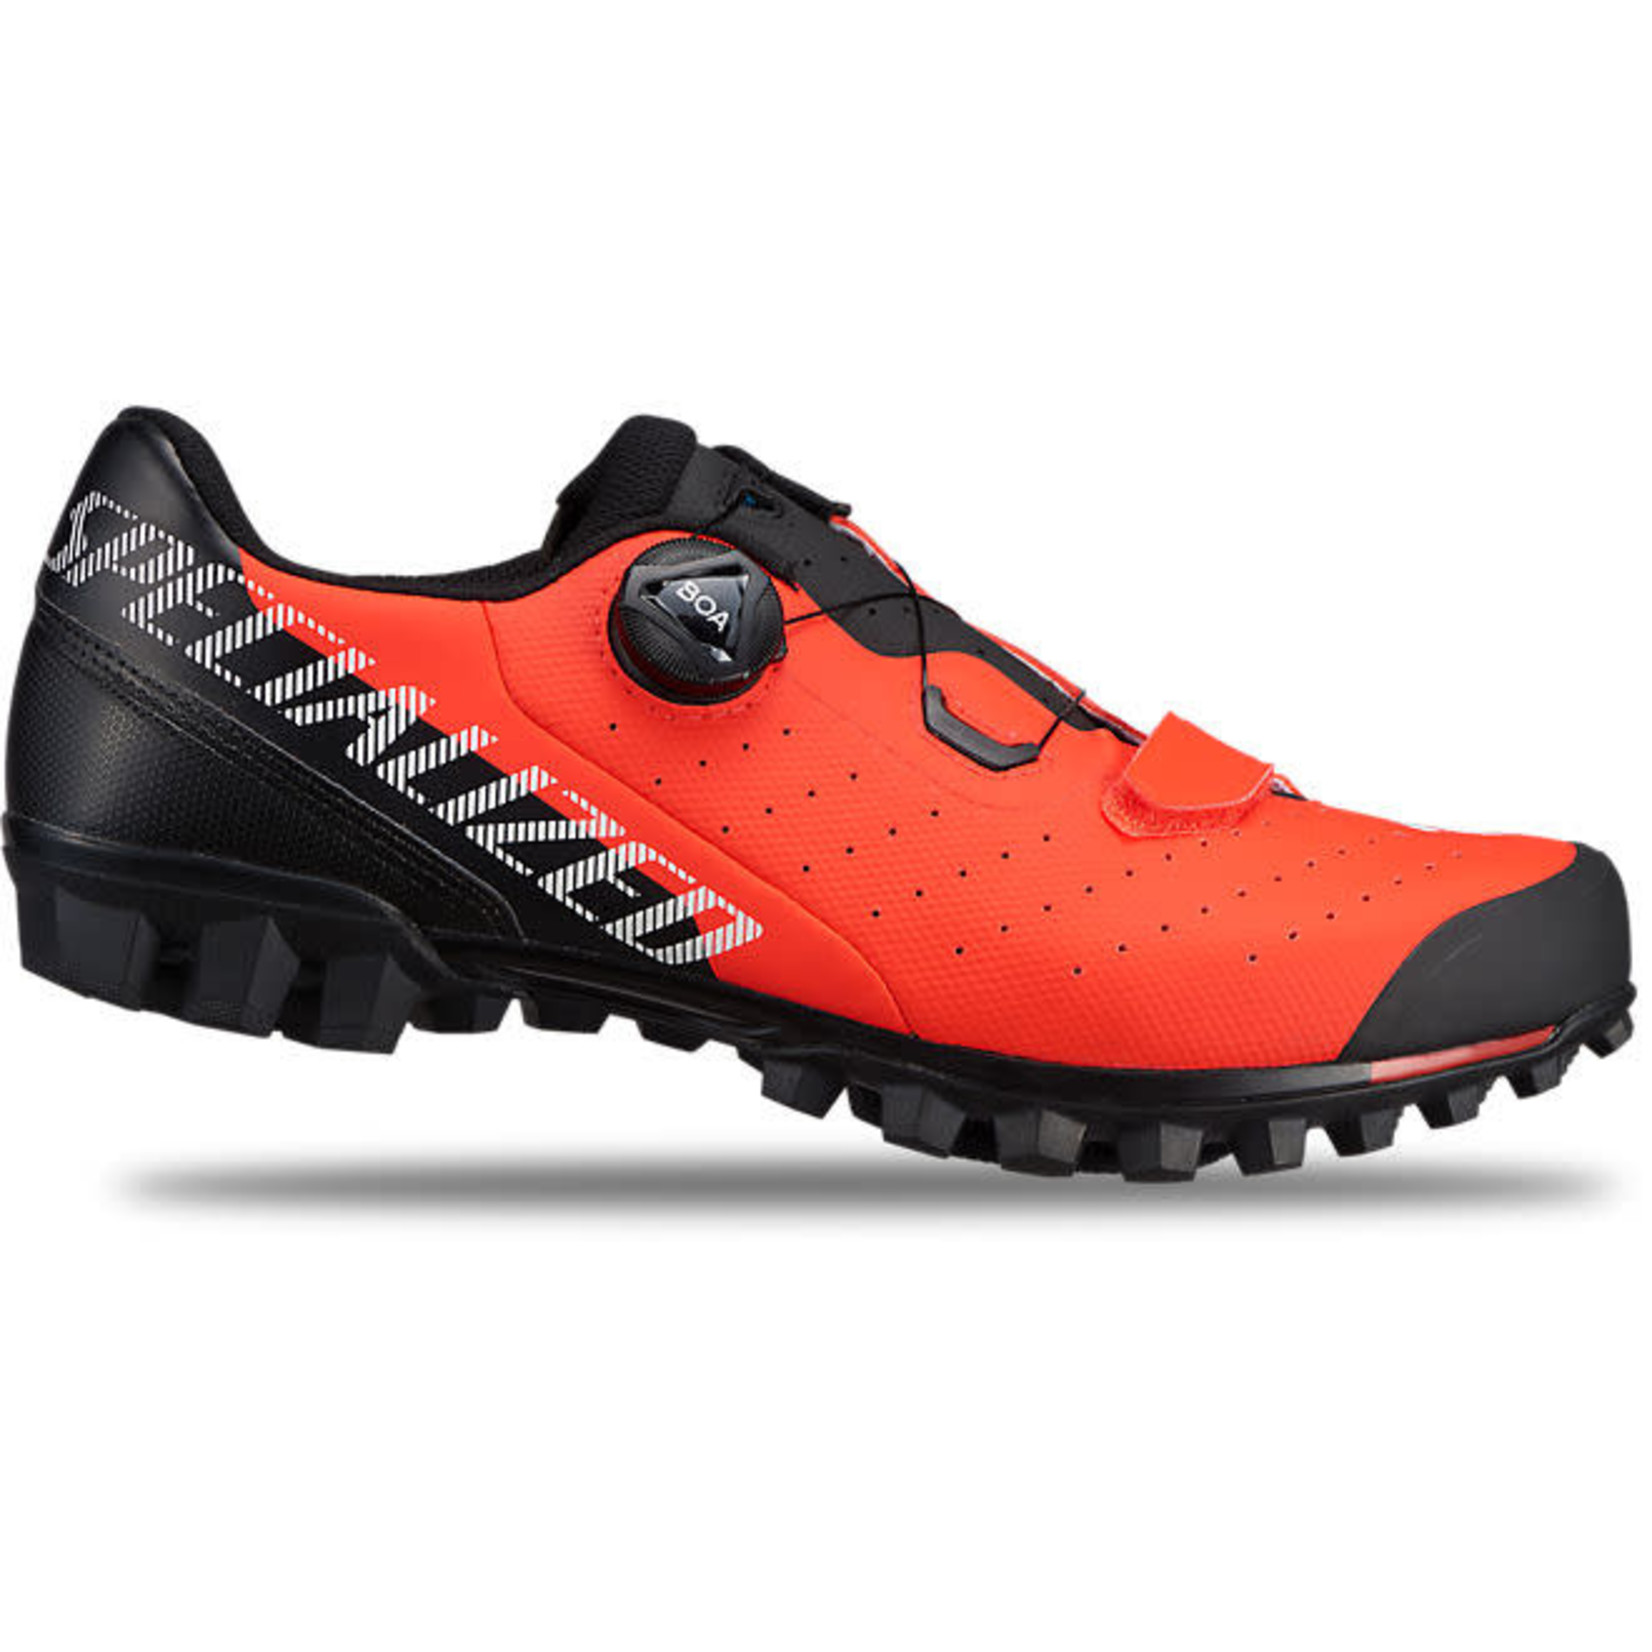 SPECIALIZED Recon 2.0 Mountain Bike Shoes